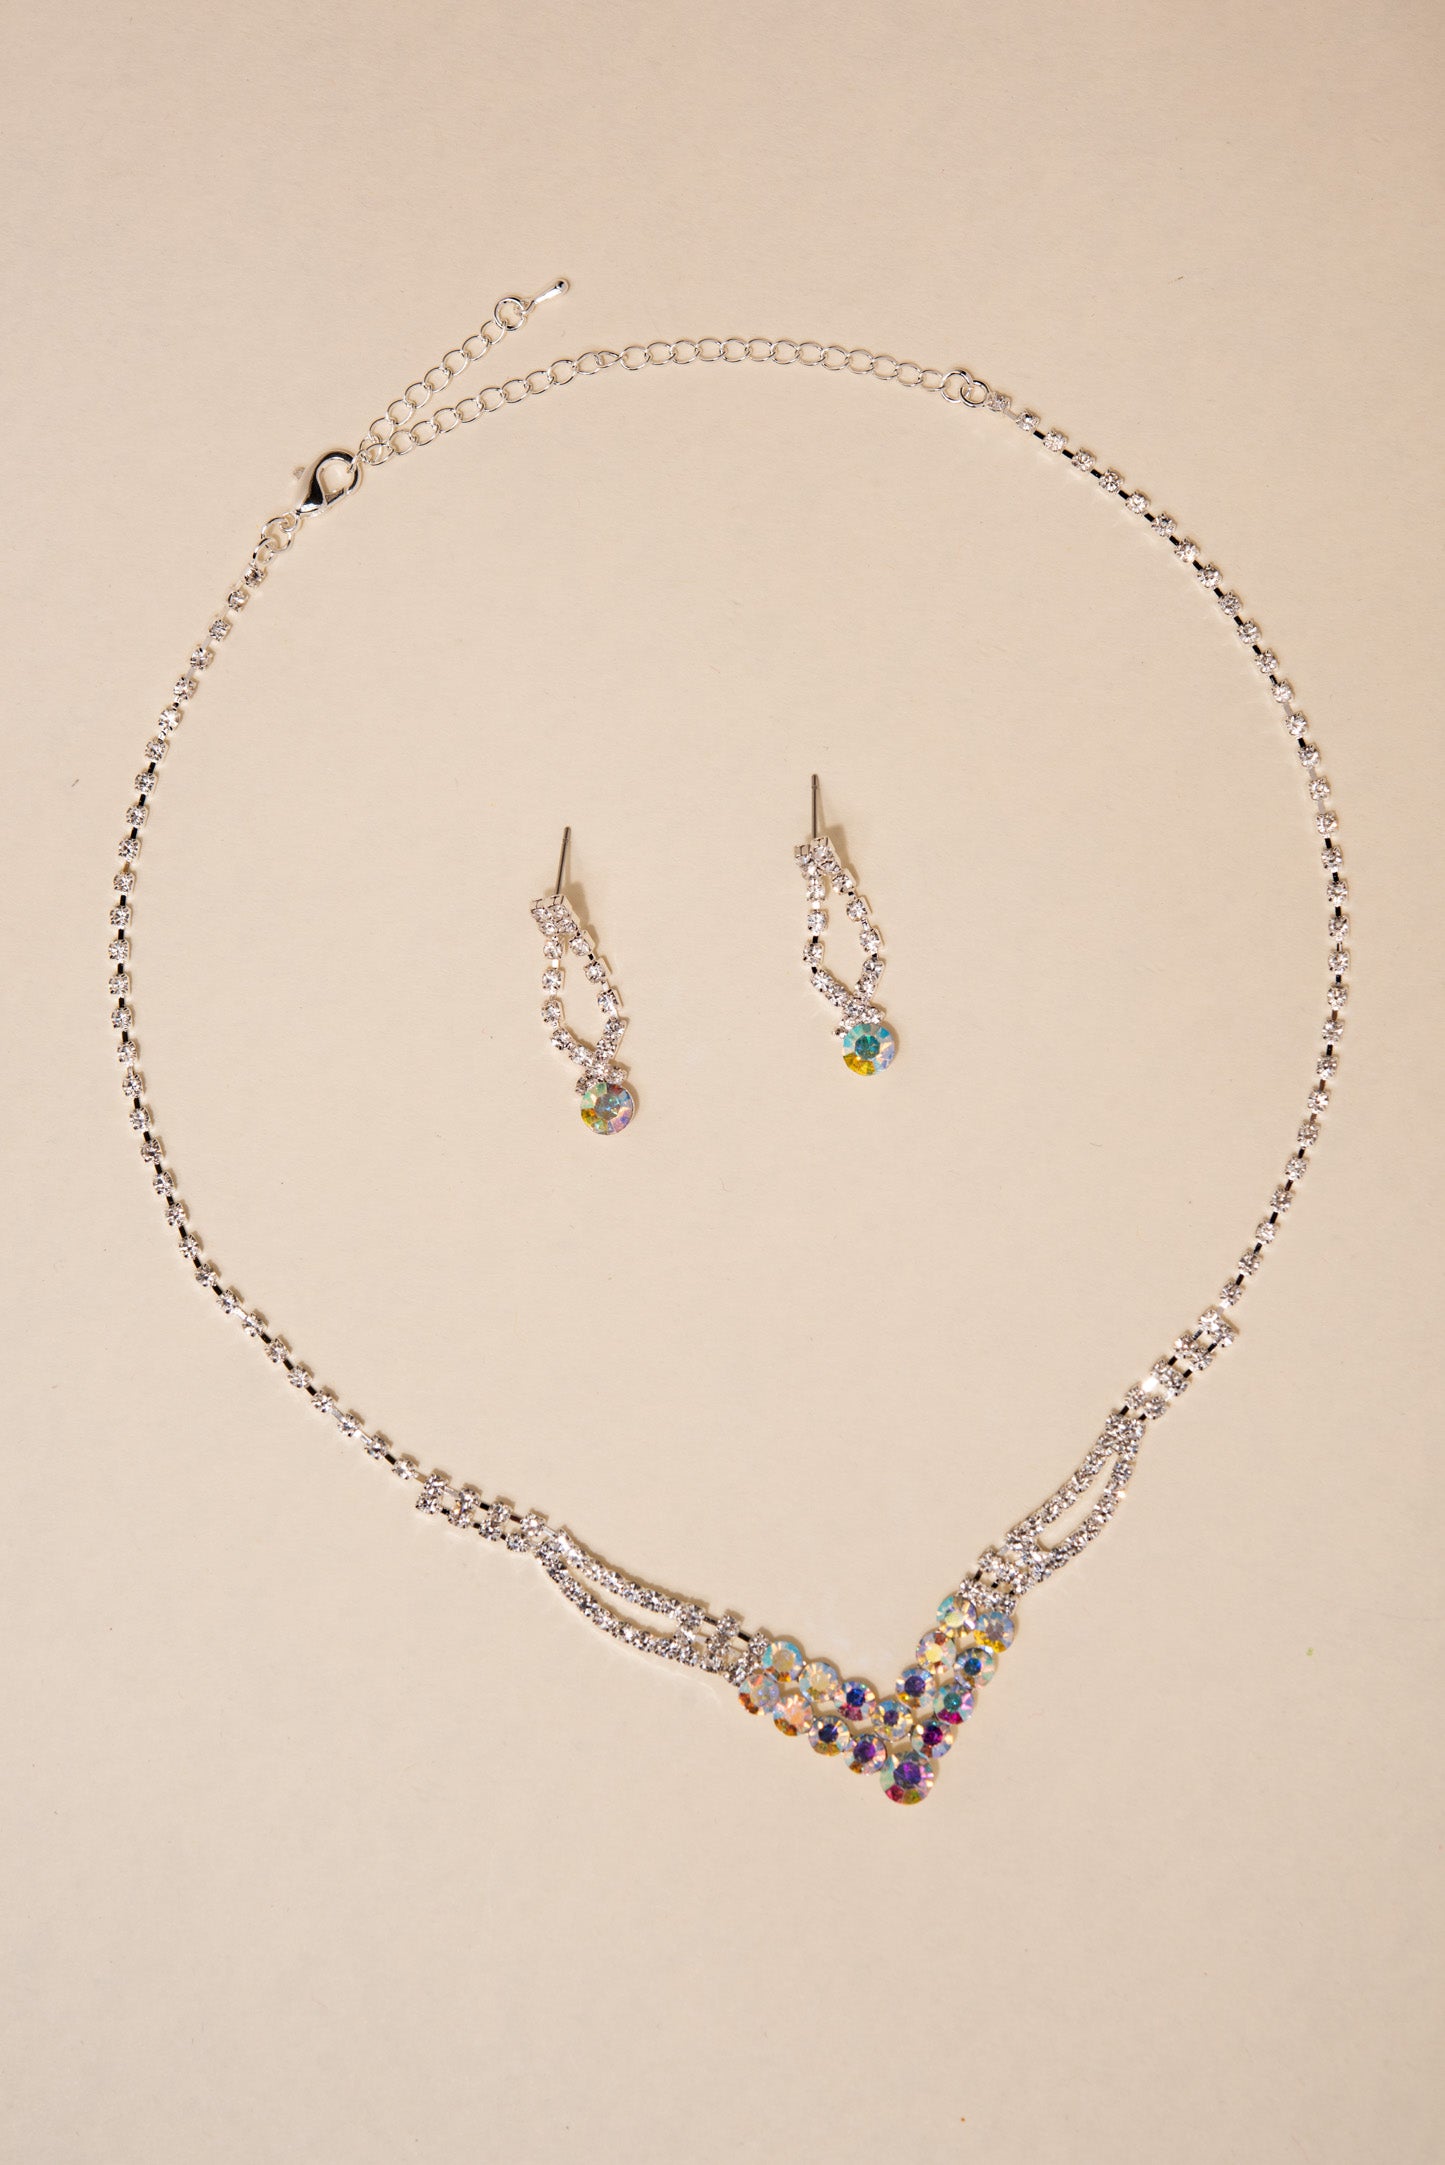 Anna Rhinestone Pave w/ Studs V Necklace & Earrings Set - Iridescent